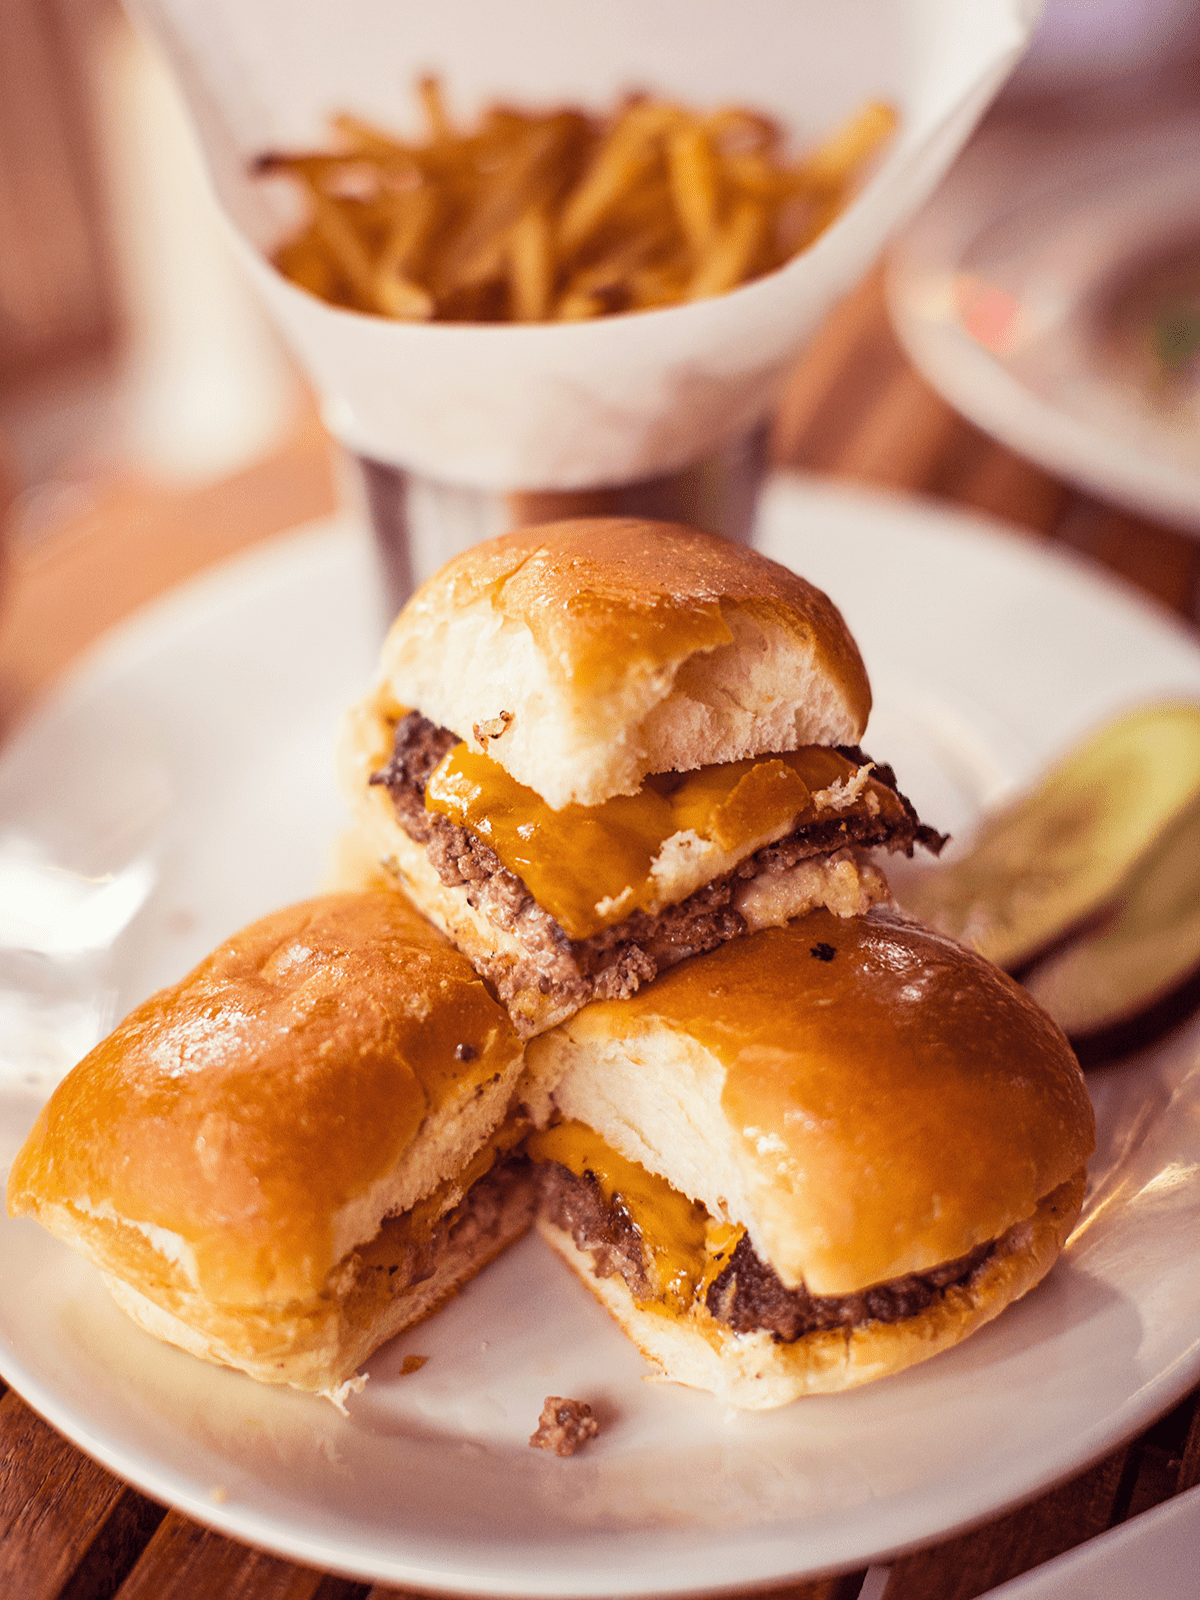 Cheeseburger sliders plated and served with fries.